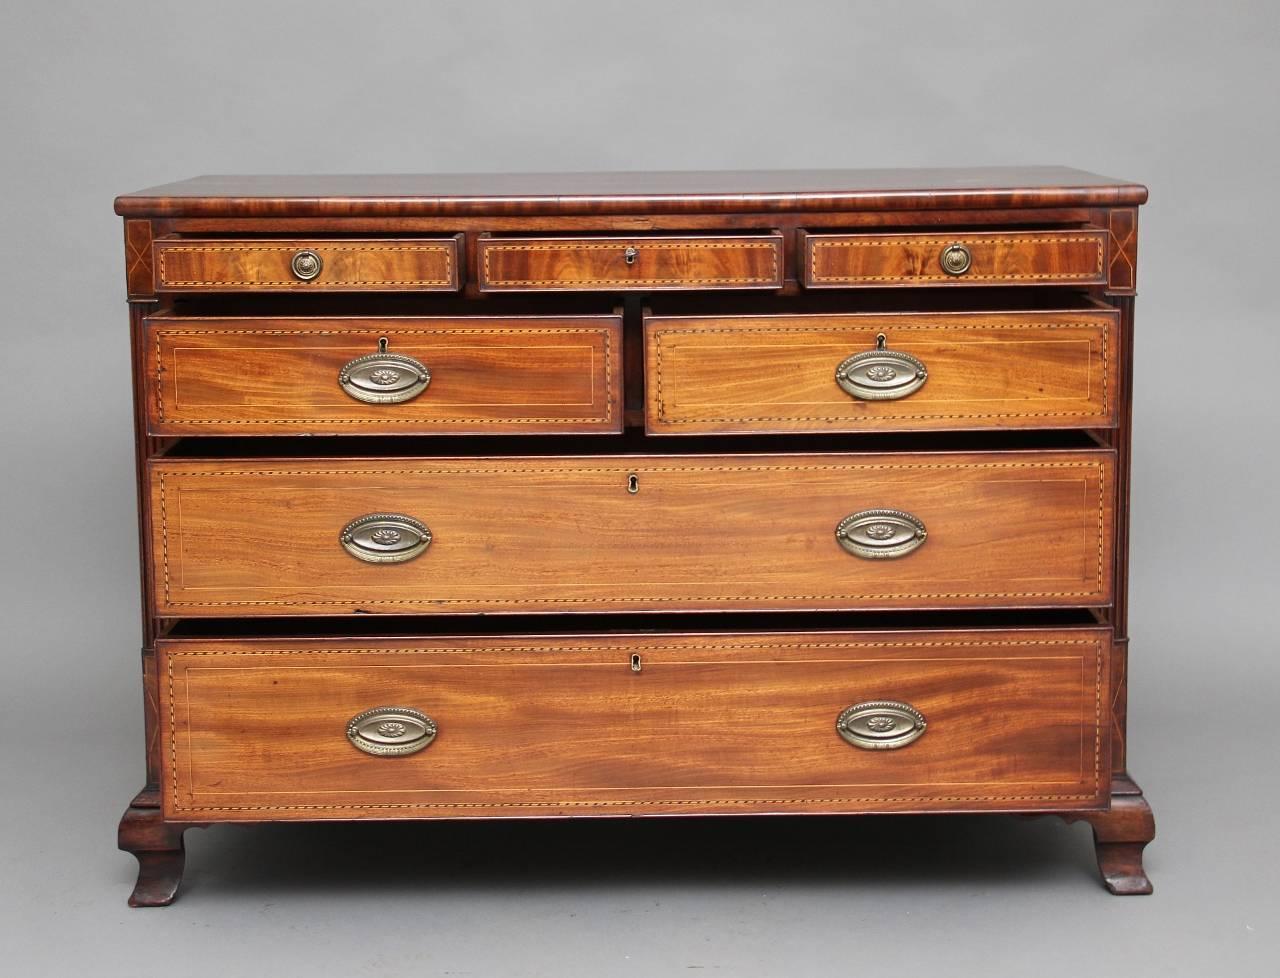 Early 19th century mahogany and chequer line-inlaid chest of drawers, the rectangular top above three small drawers with brass ring handles, and below a combination of two short over two long graduated drawers between fluted stiles, standing on ogee